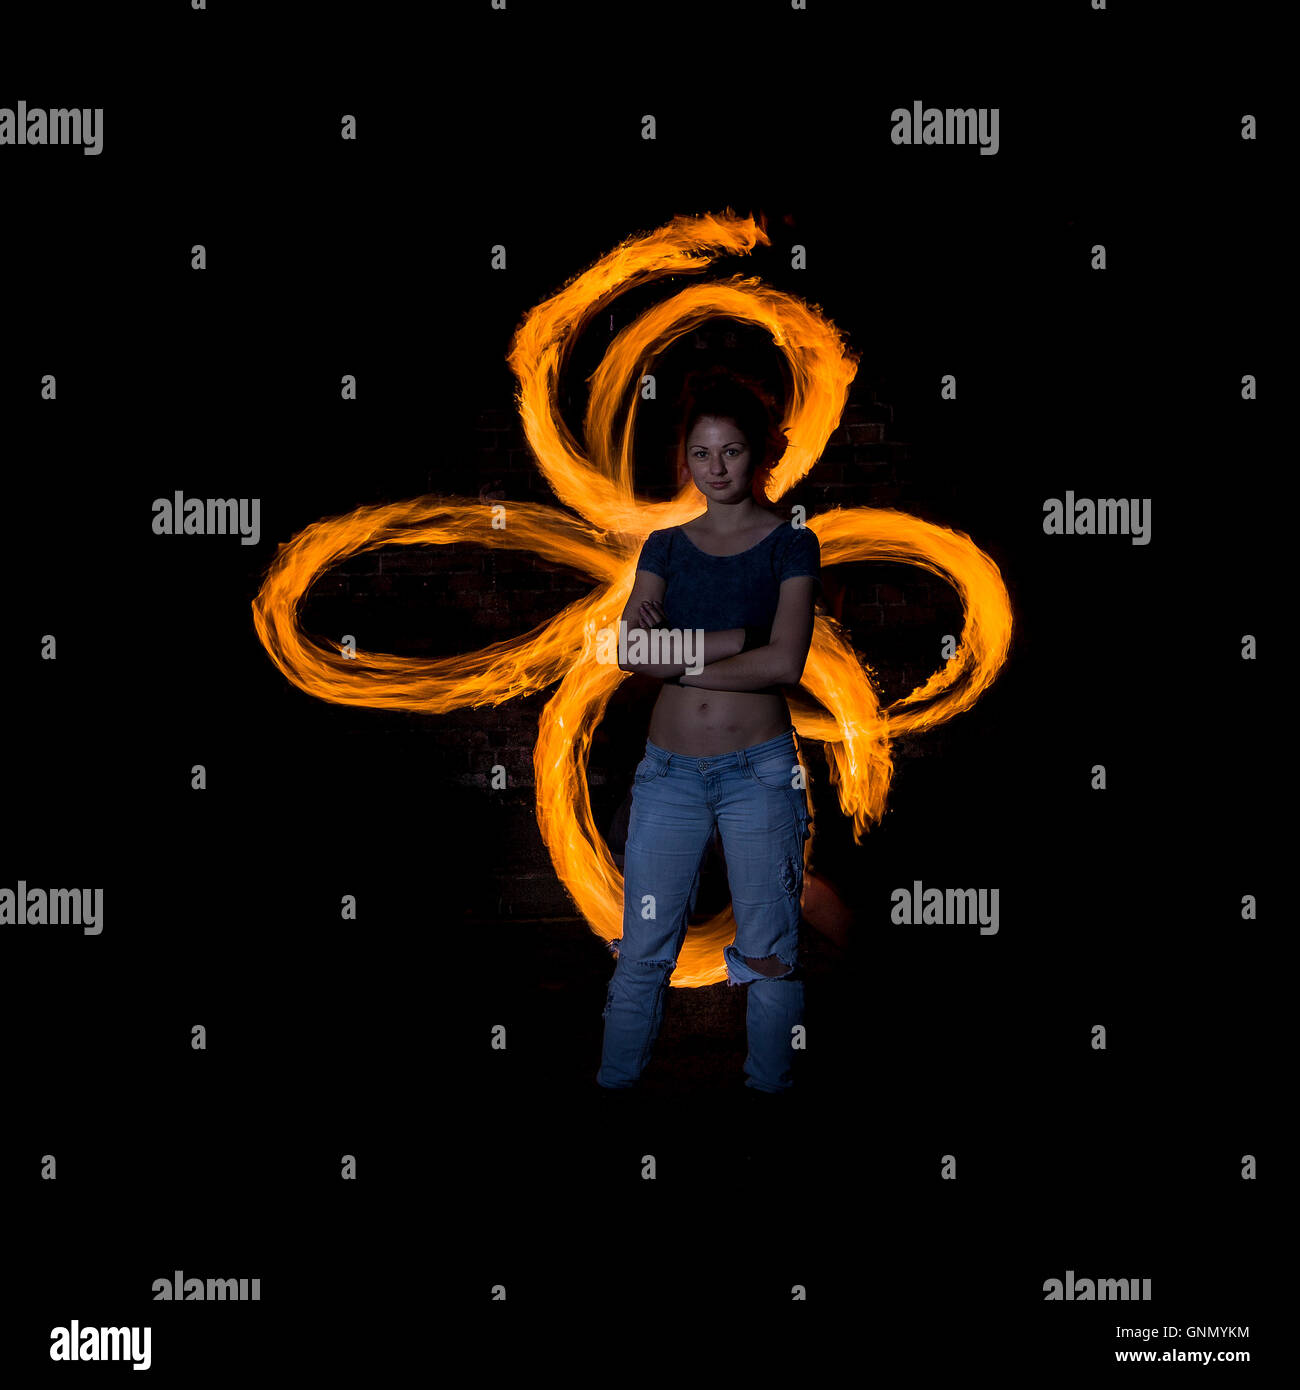 Female fire dancer poses silhouetted against intersecting rings of flame Stock Photo